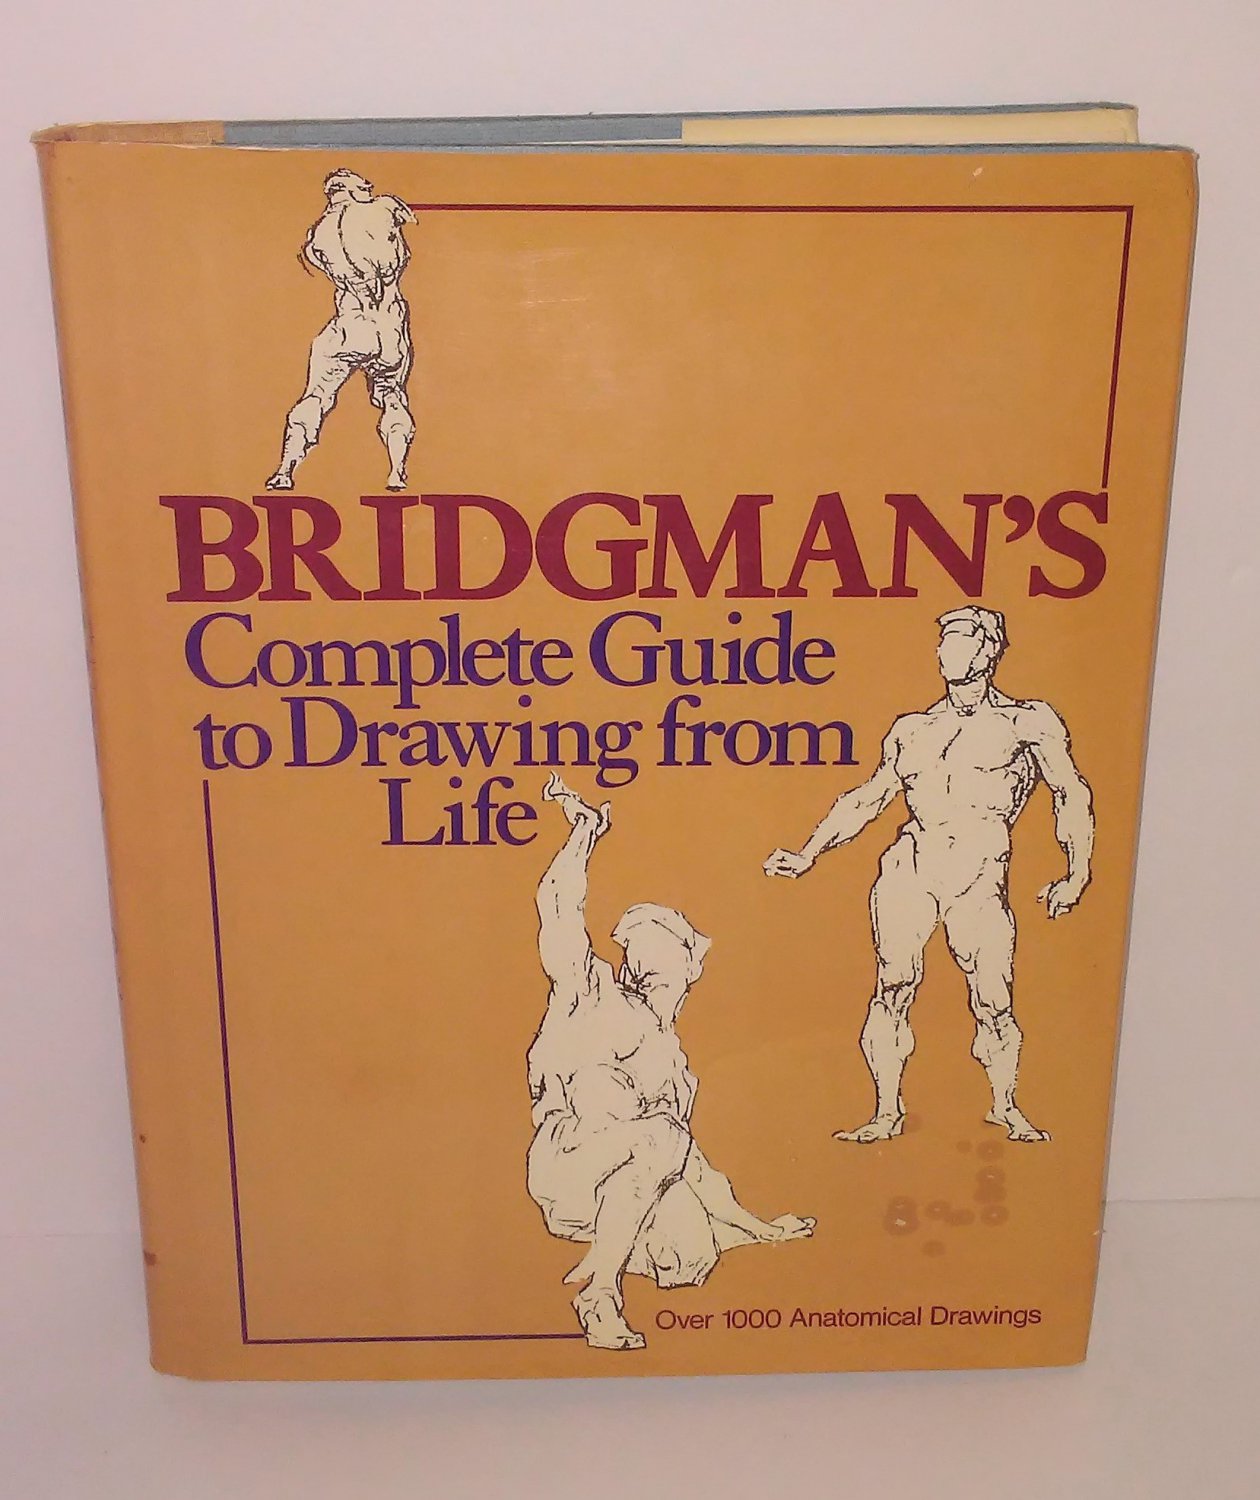 Bridgman's Complete Guide to Drawing from Life Book from 1978